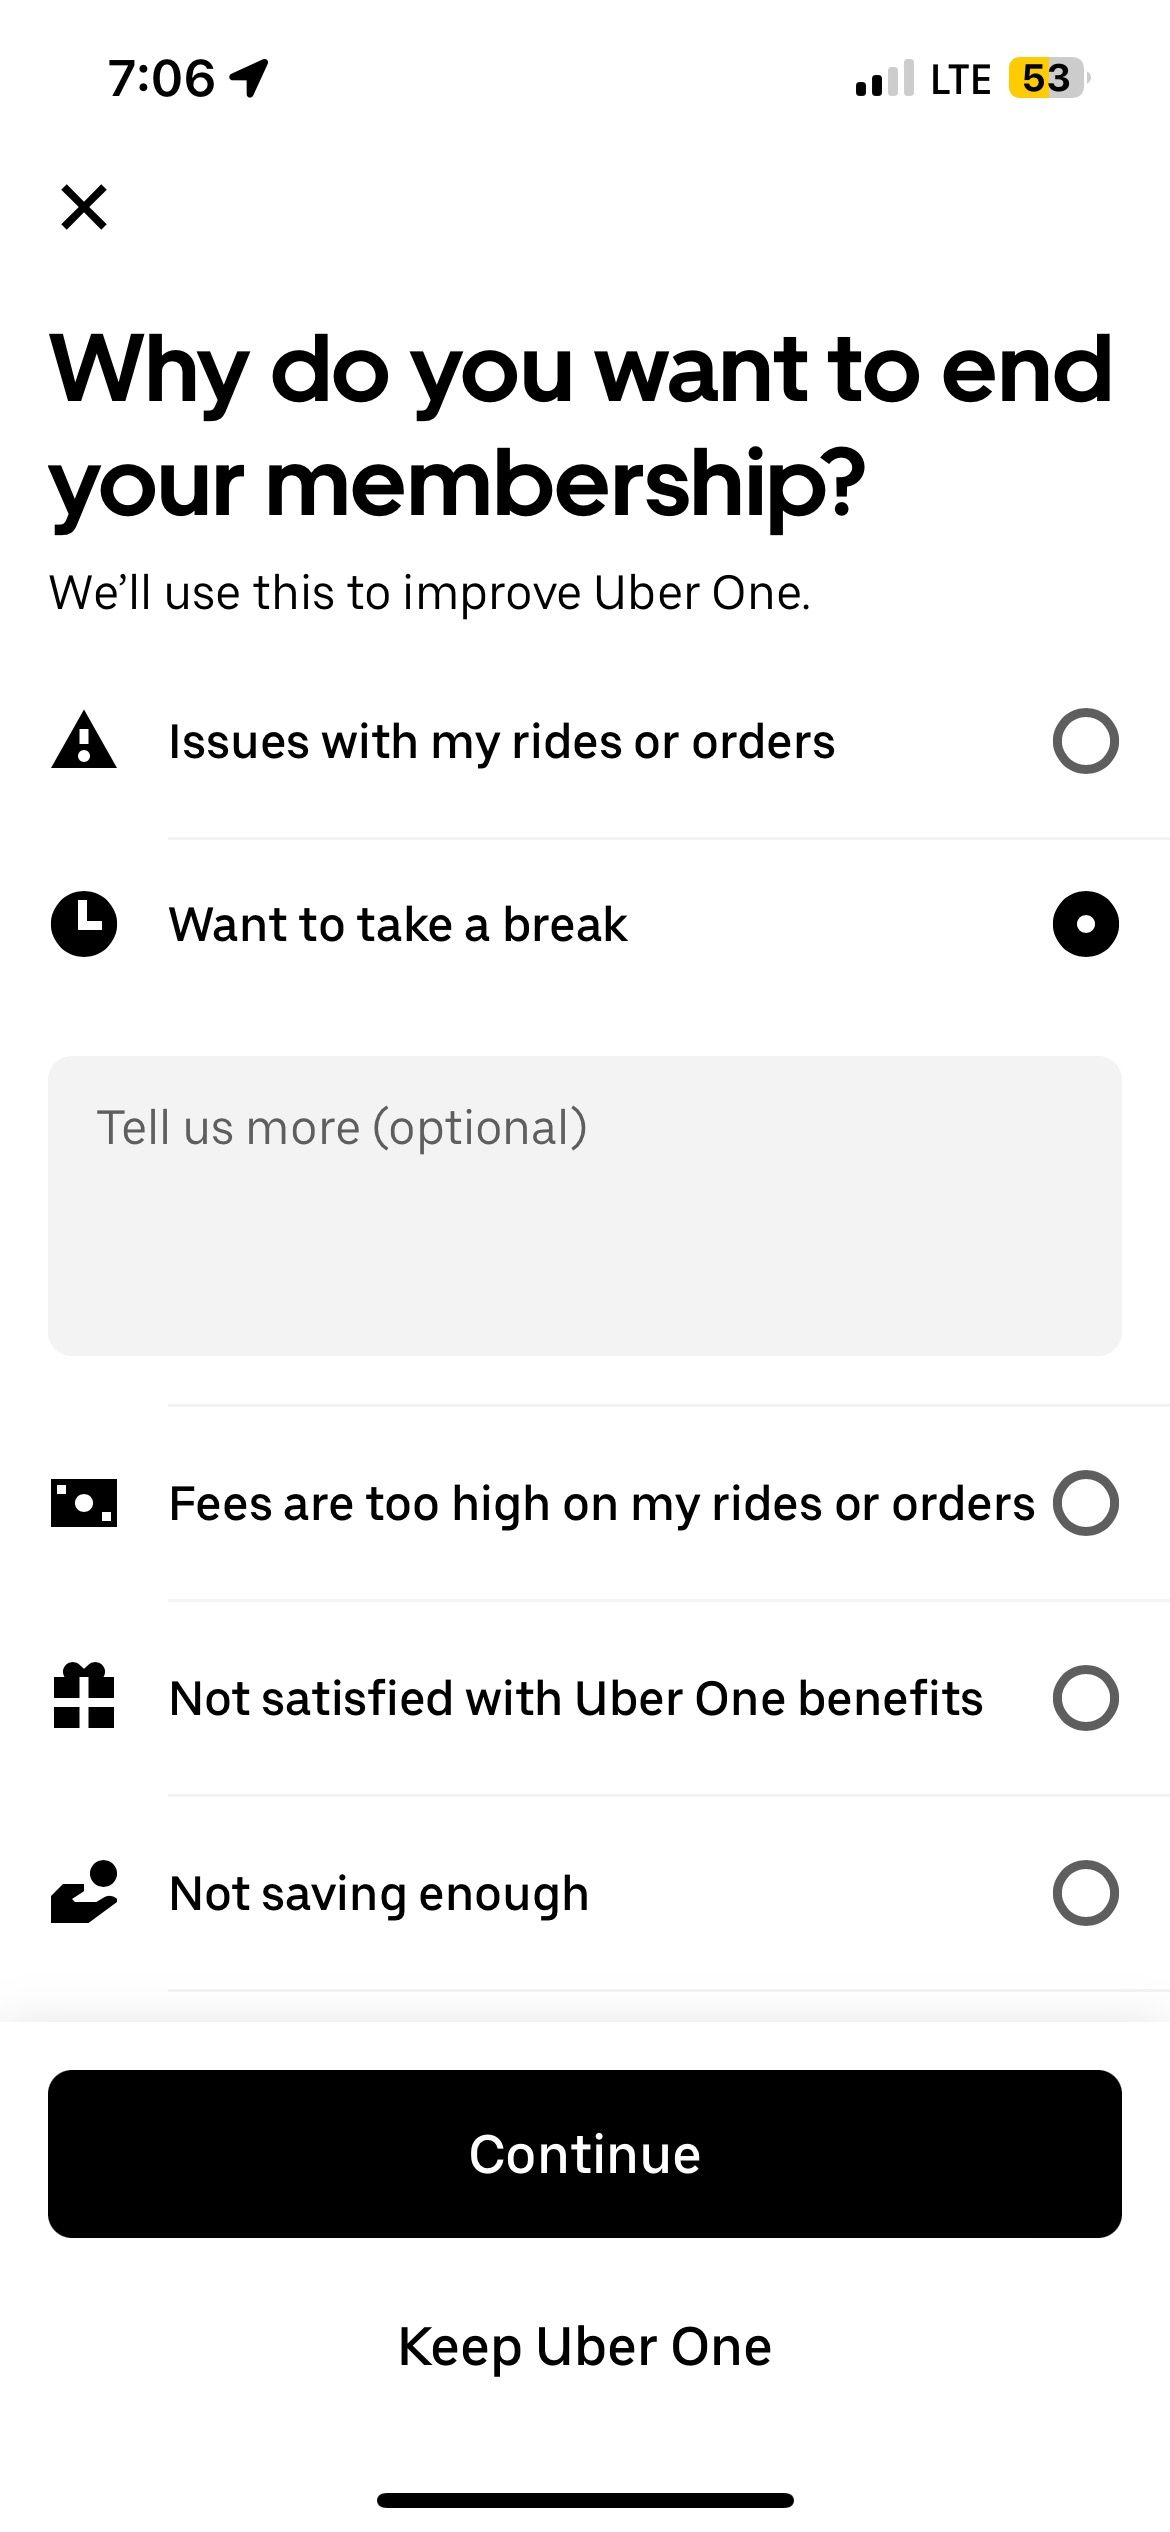 Screen Displaying Reasons Why User Would Like To End Uber One Membership 